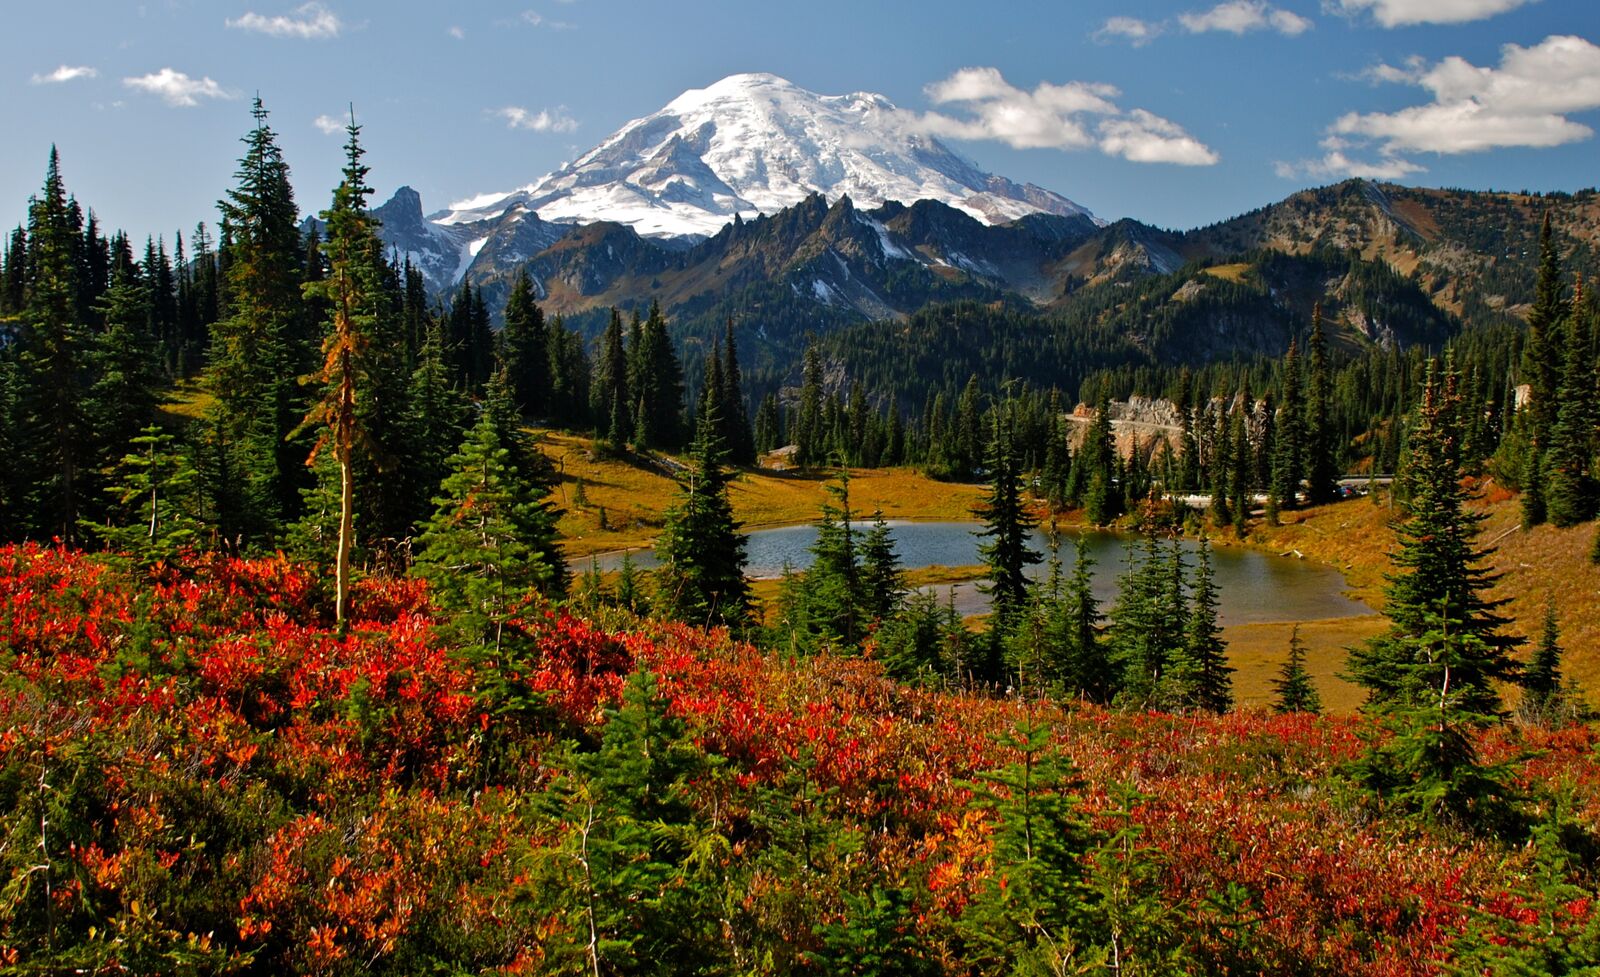 Mt. rainier is home to one of the hardest hikes in the US you can do in a day - to camp mnuir